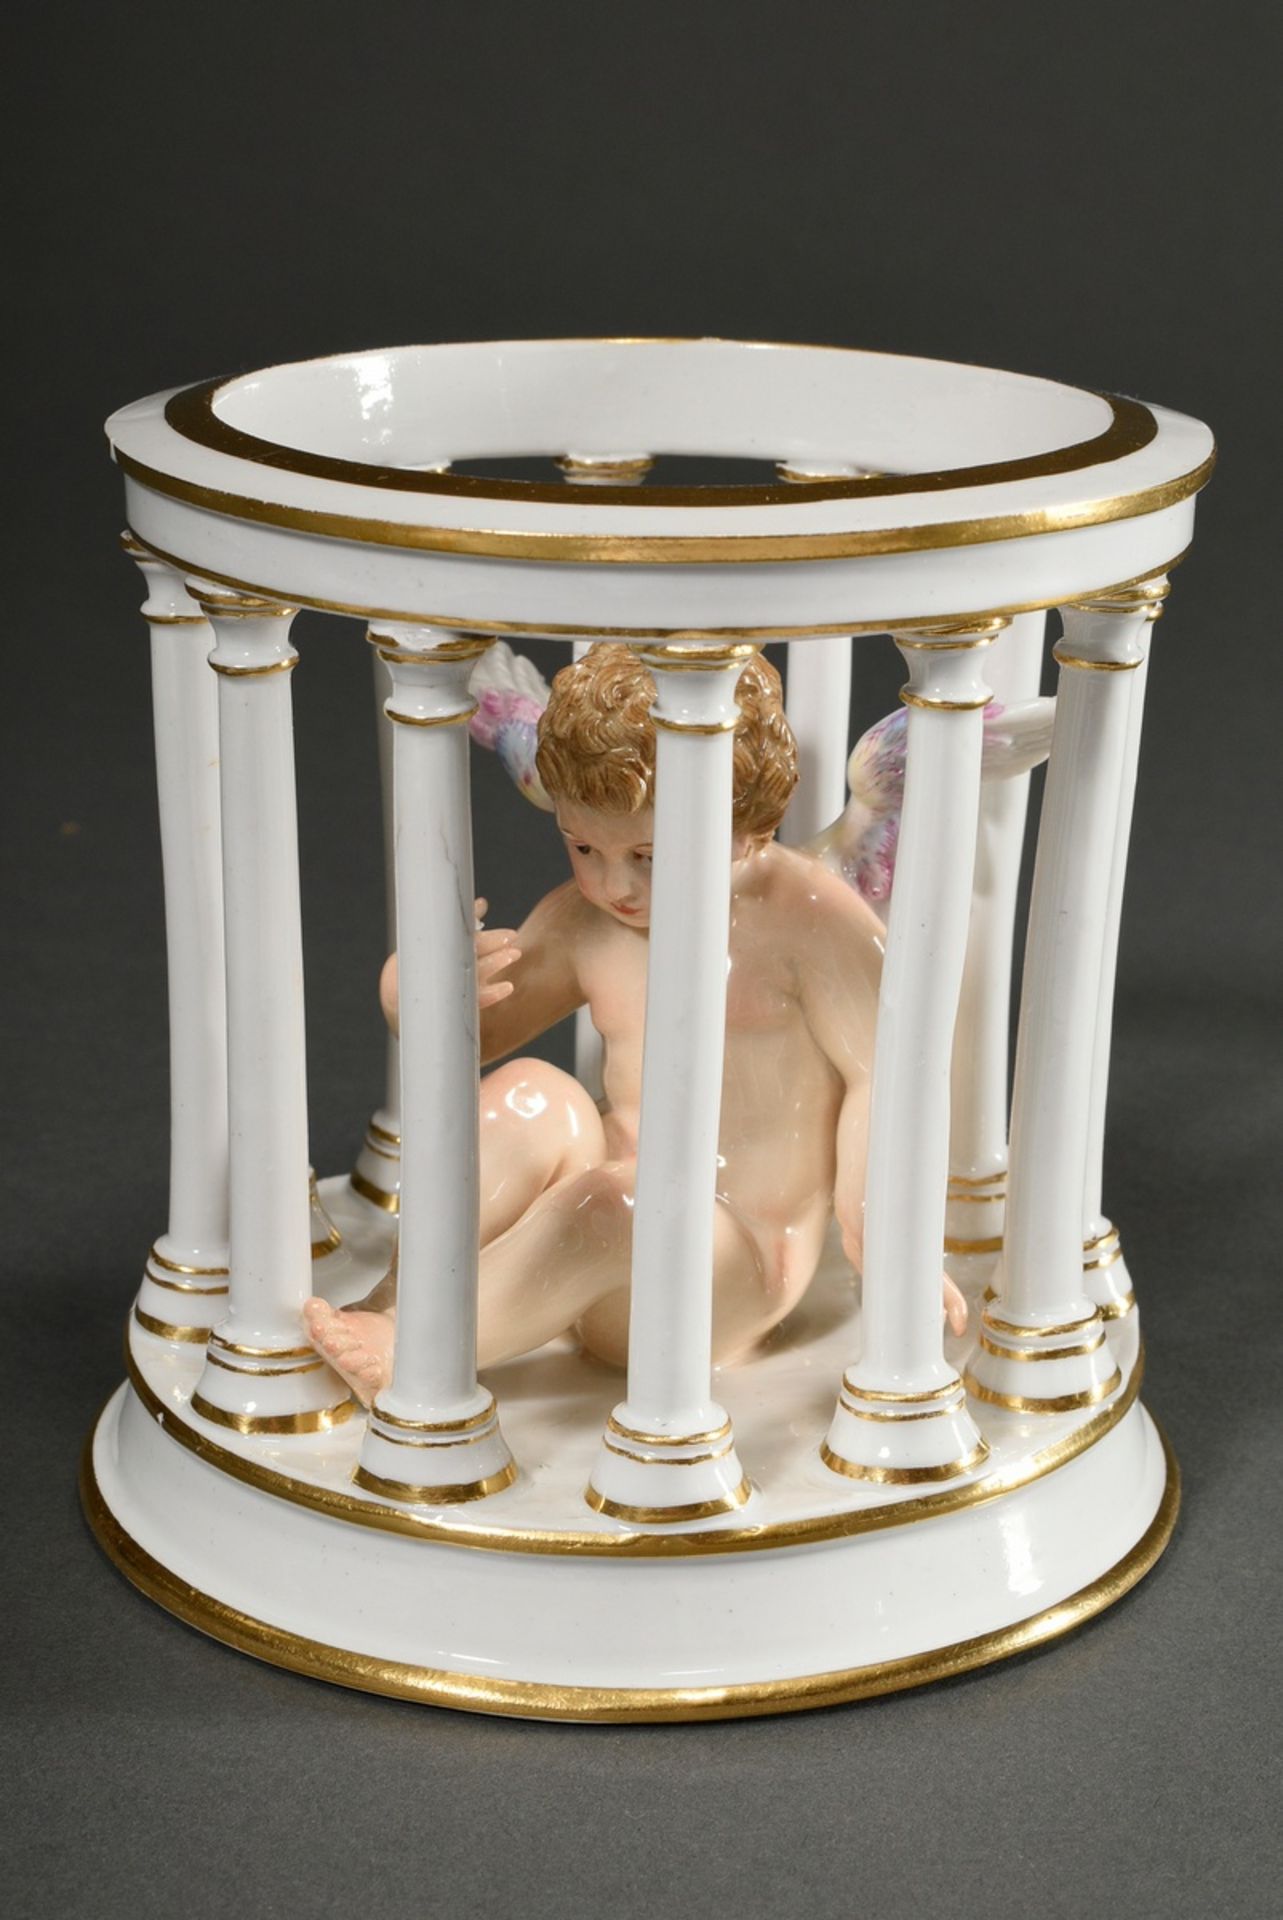 Meissen figurine "Cupid in a cage", bottom signed, bosier no.: 101, model no.: H. 95, h. 12cm, Ø 11 - Image 2 of 8